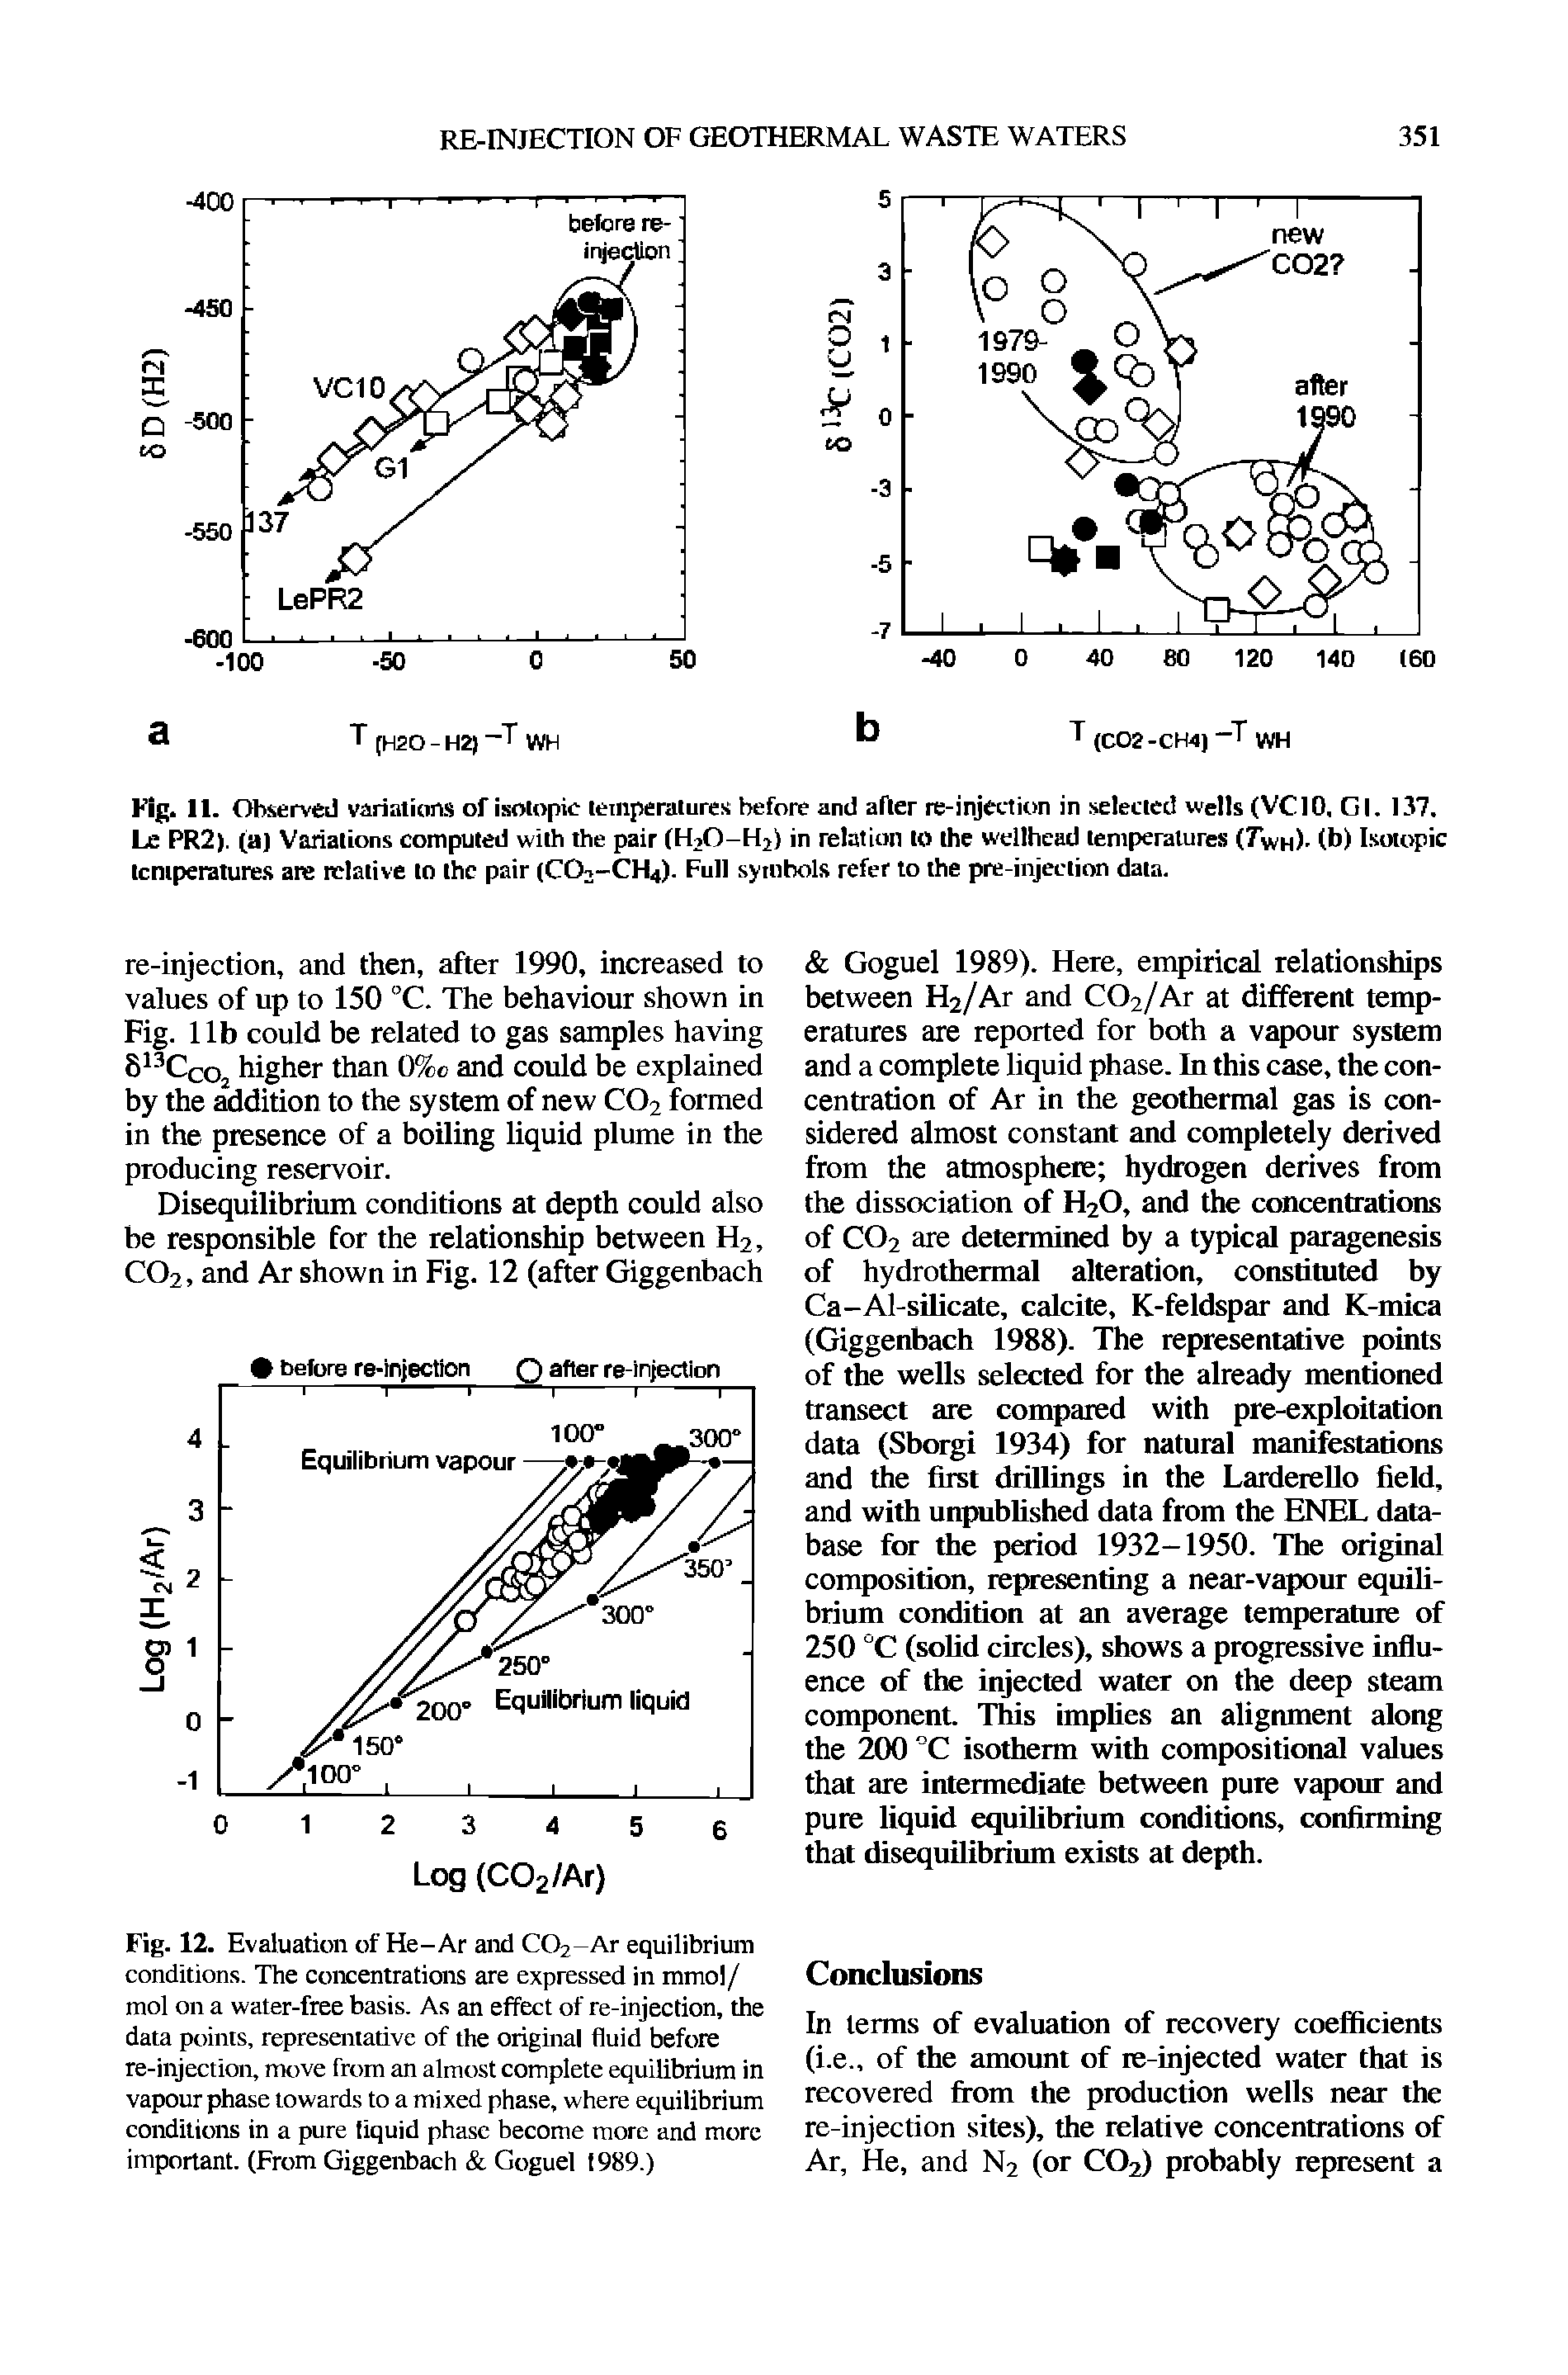 Fig. 12. Evaluation of He-Ar and C02-Ar equilibrium conditions. The concentrations are expressed in mmol/ mol on a water-free basis. As an effect of re-injection, the data points, representative of the original fluid before re-injection, move from an almost complete equilibrium in vapour phase towards to a mixed phase, where equilibrium conditions in a pure liquid phase become more and more important. (From Giggenbach Goguel 1989.)...